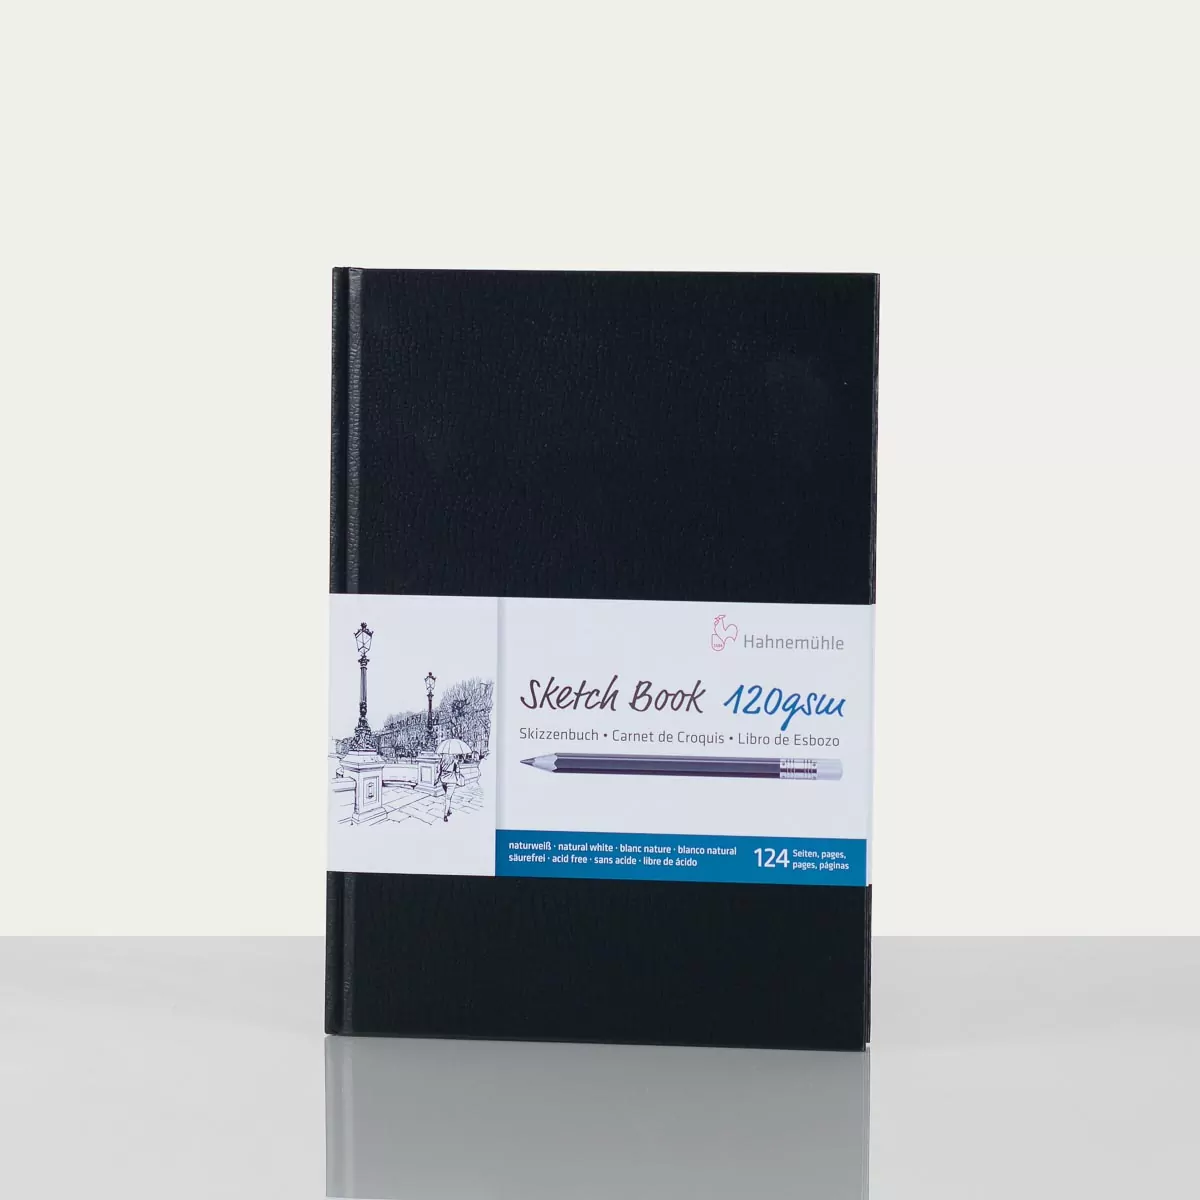 Traditional Hahnemuhle SketchBook * 120gsm DIN A5 62 Sheets